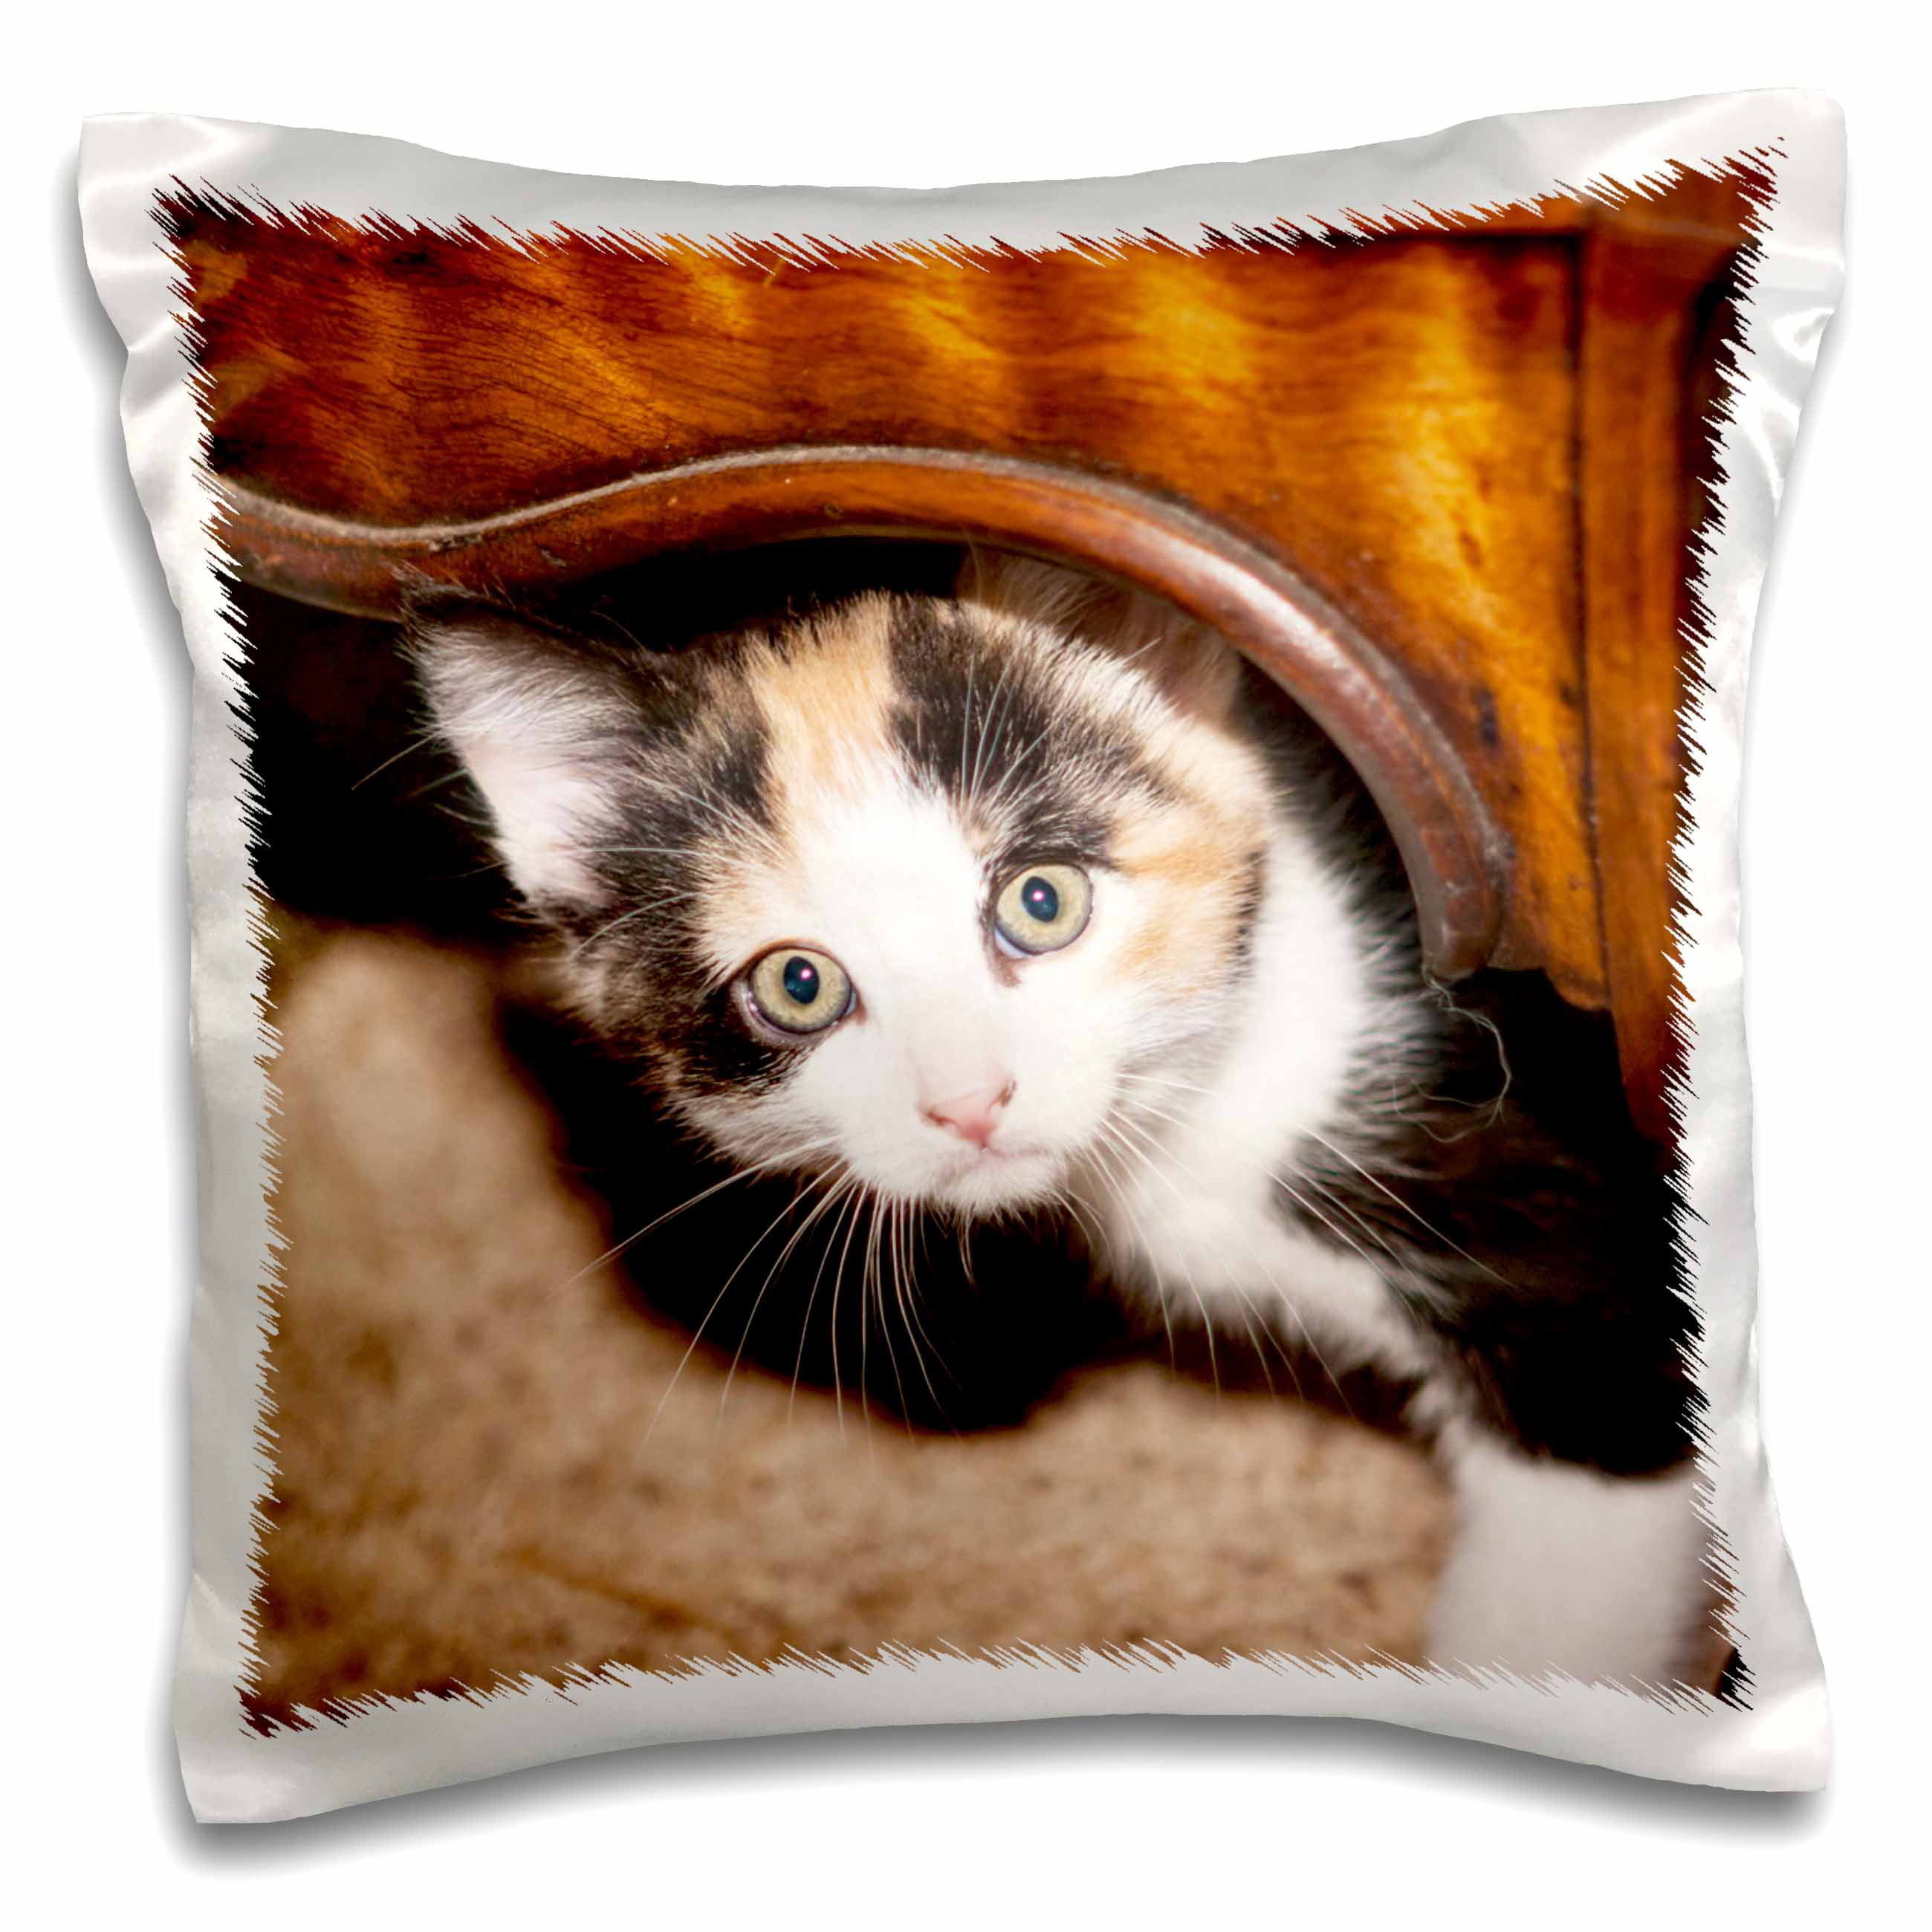 3D Rose Domestic Calico Cat Peeking Out-Na02 Pwo0010-Piperanne Worcester Towel 15 x 22